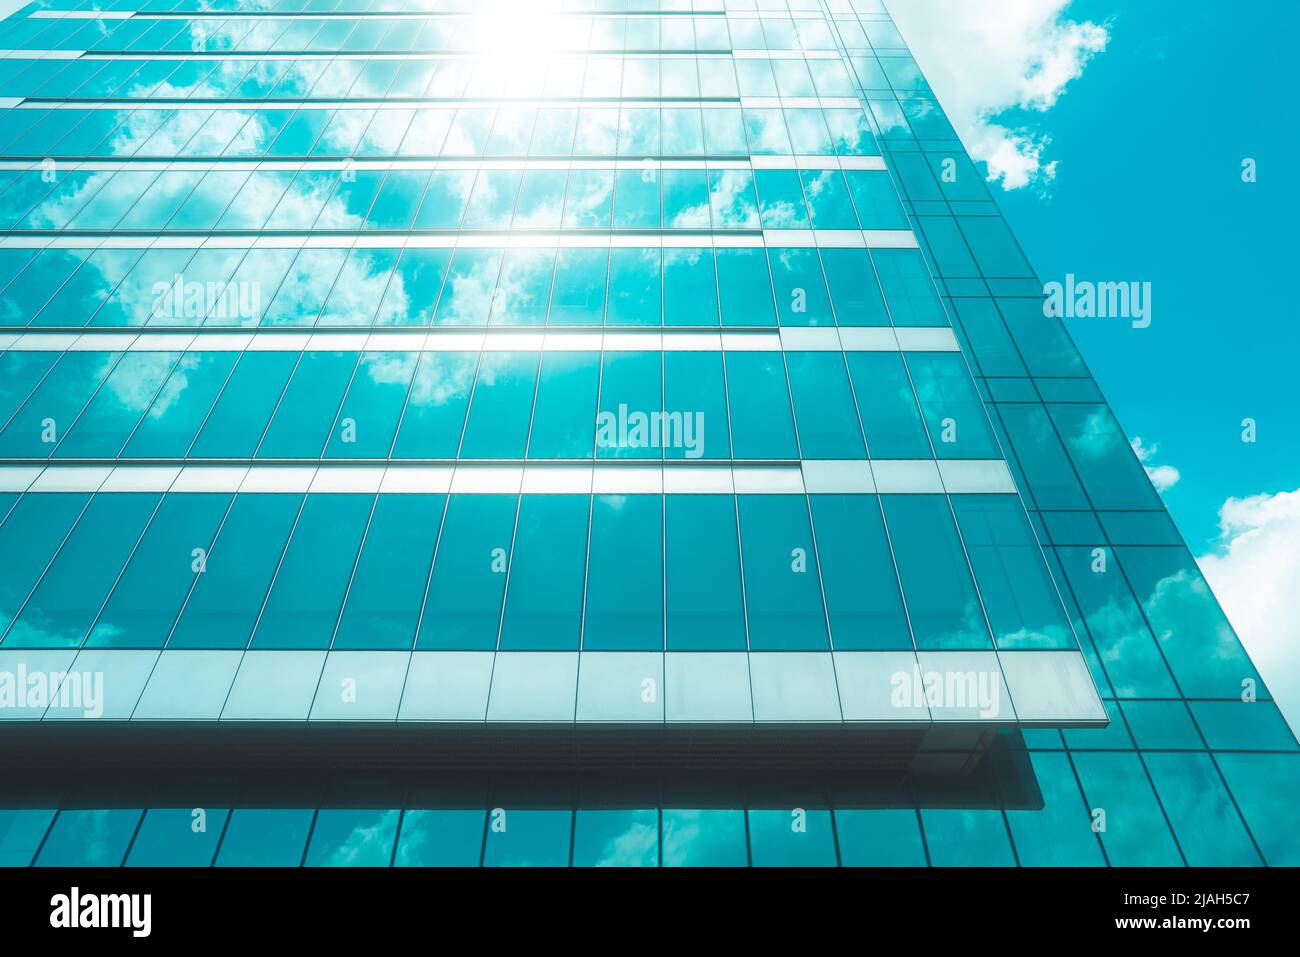 underside panoramic and perspective view to steel blue glass high rise building skyscrapers, business concept of successful industrial architecture Stock Photo